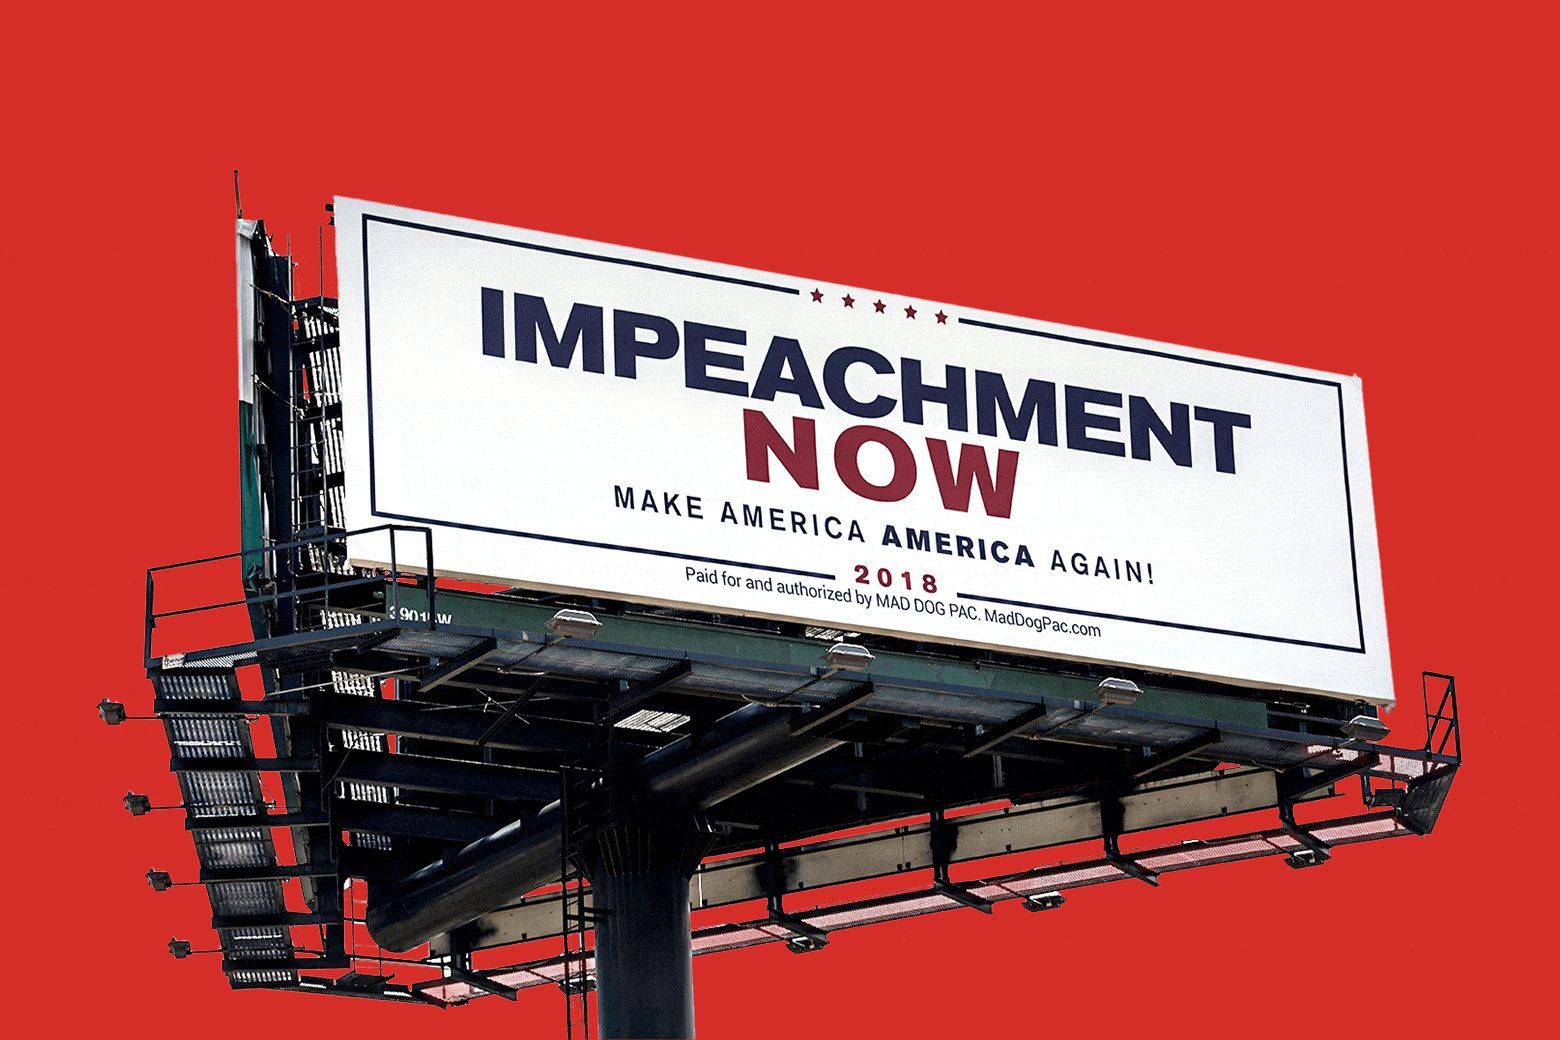 An "Impeachment Now" billboard against a blue and red blinking background.